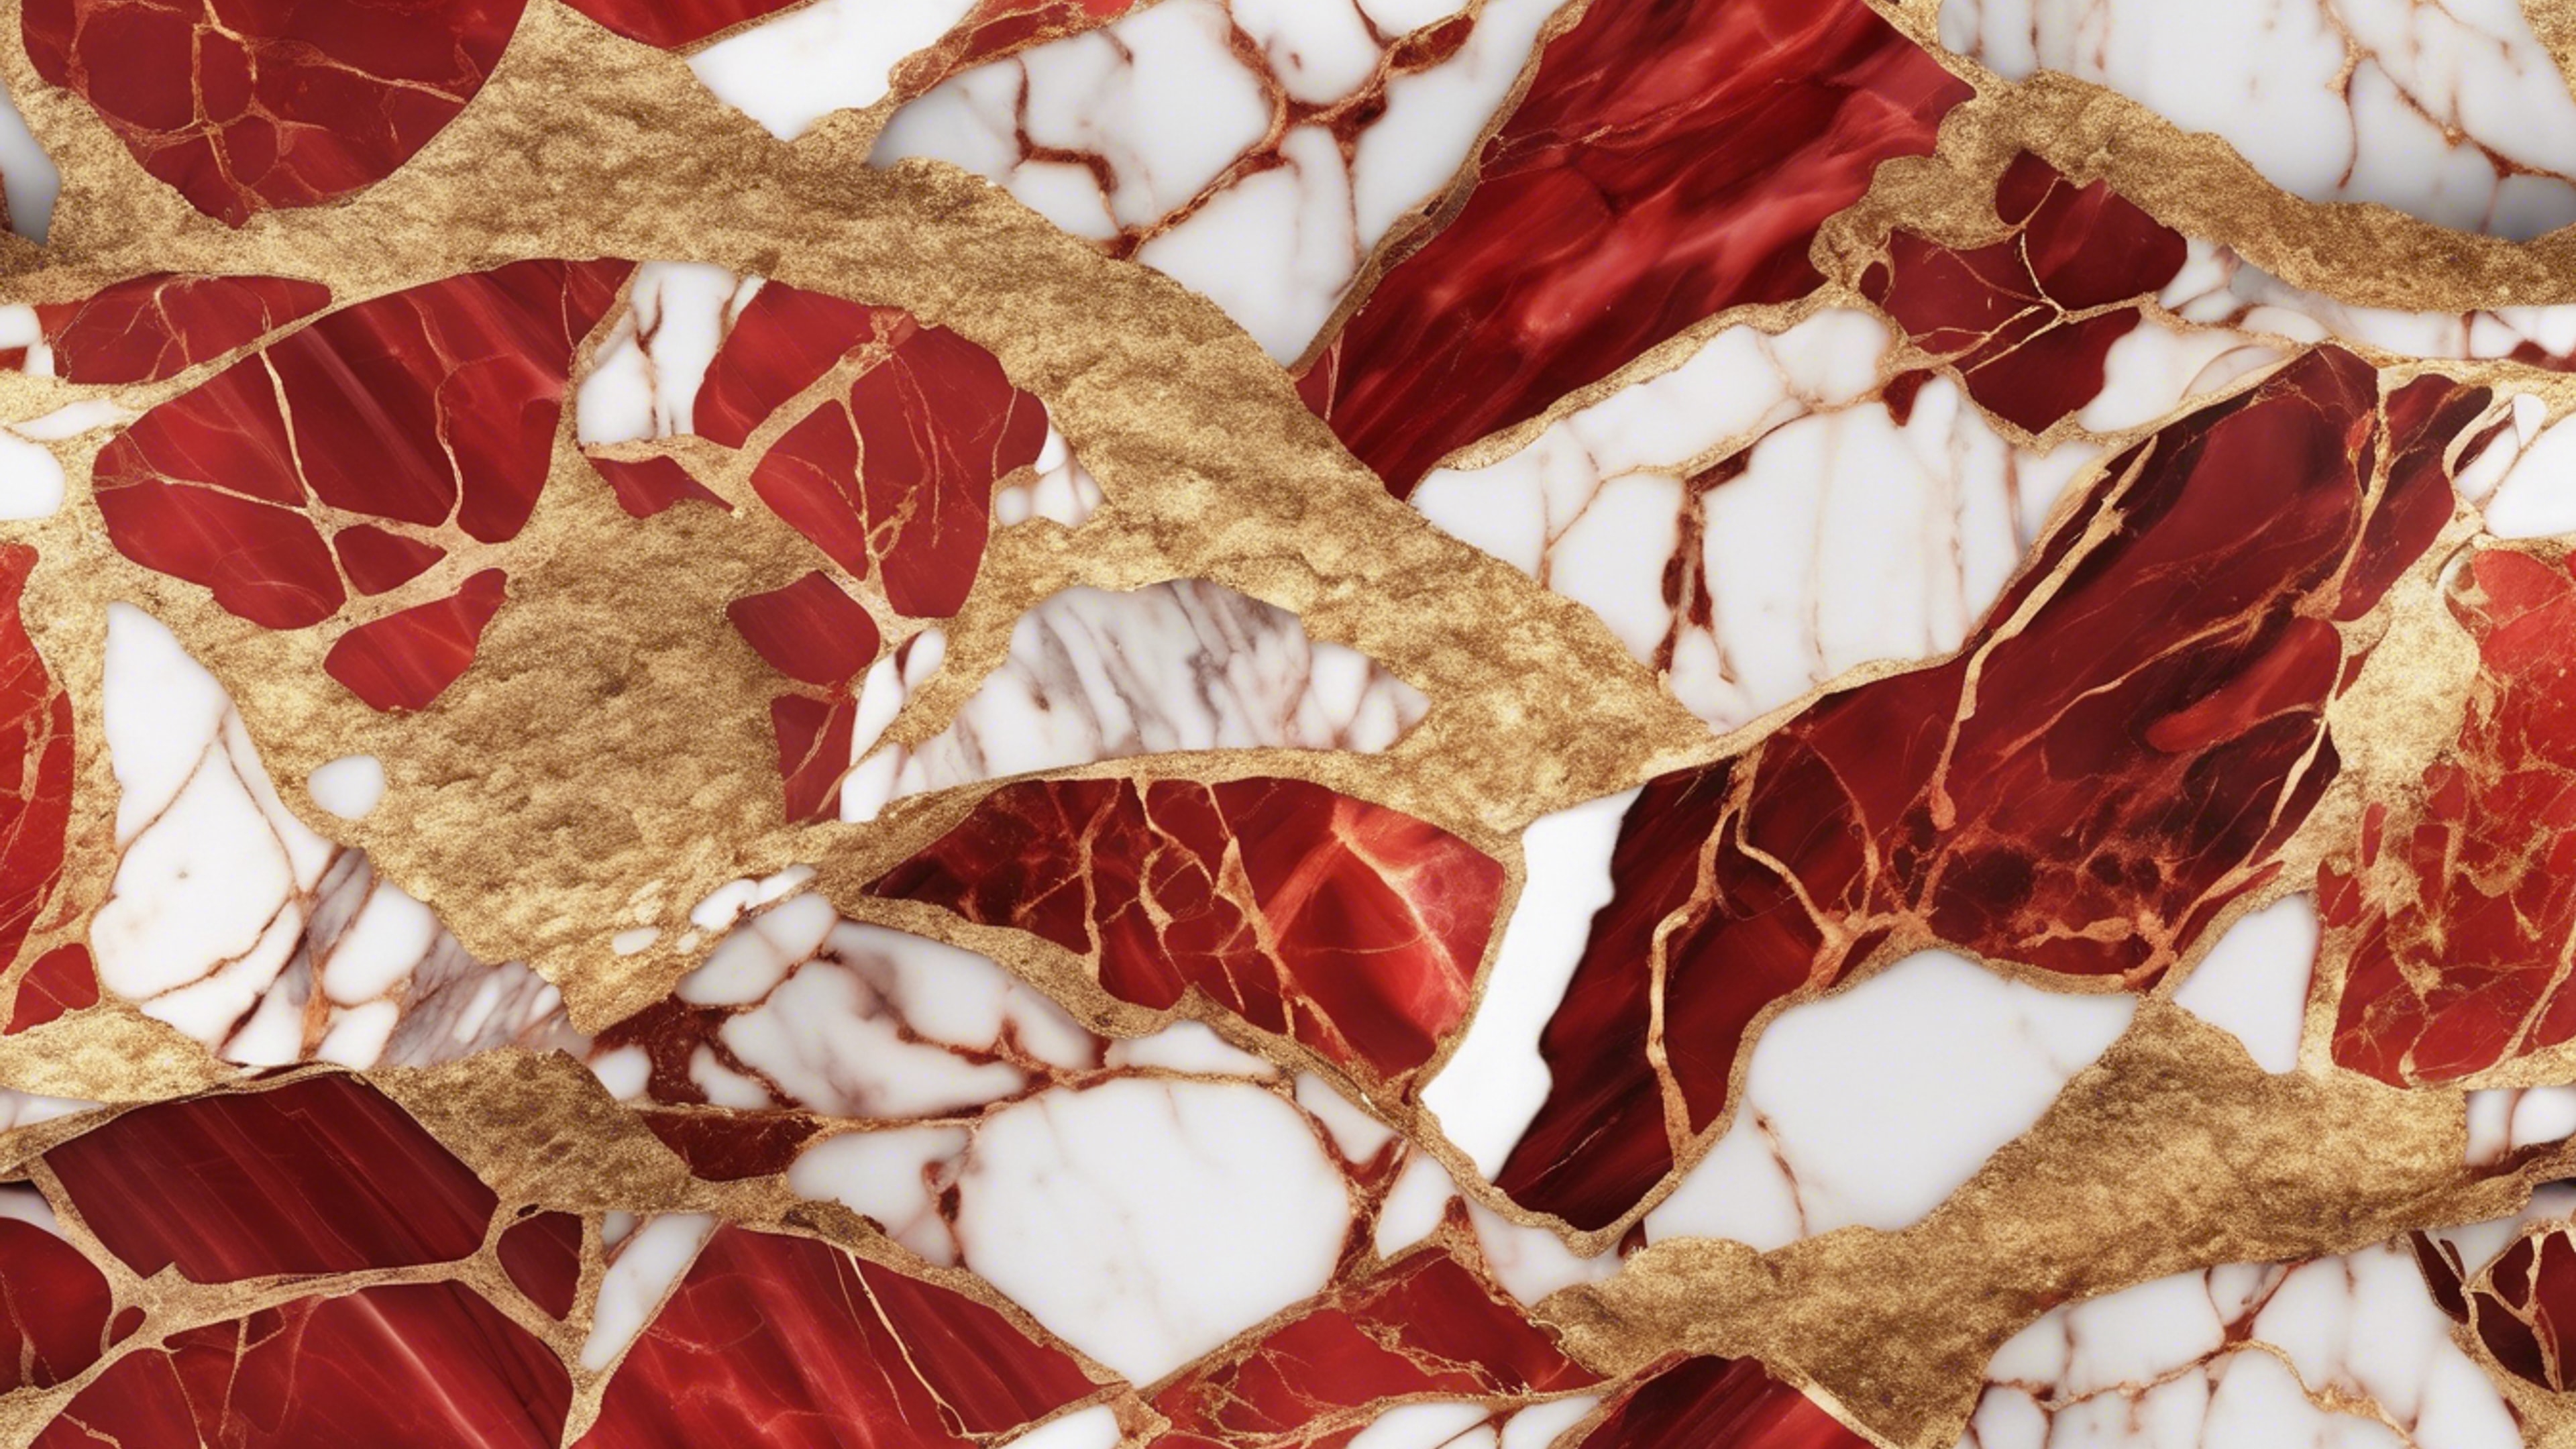 Seamless pattern of red and gold marble set that reflects an elegant aesthetic. Tapeta[f027cacdf9b04c65aa51]